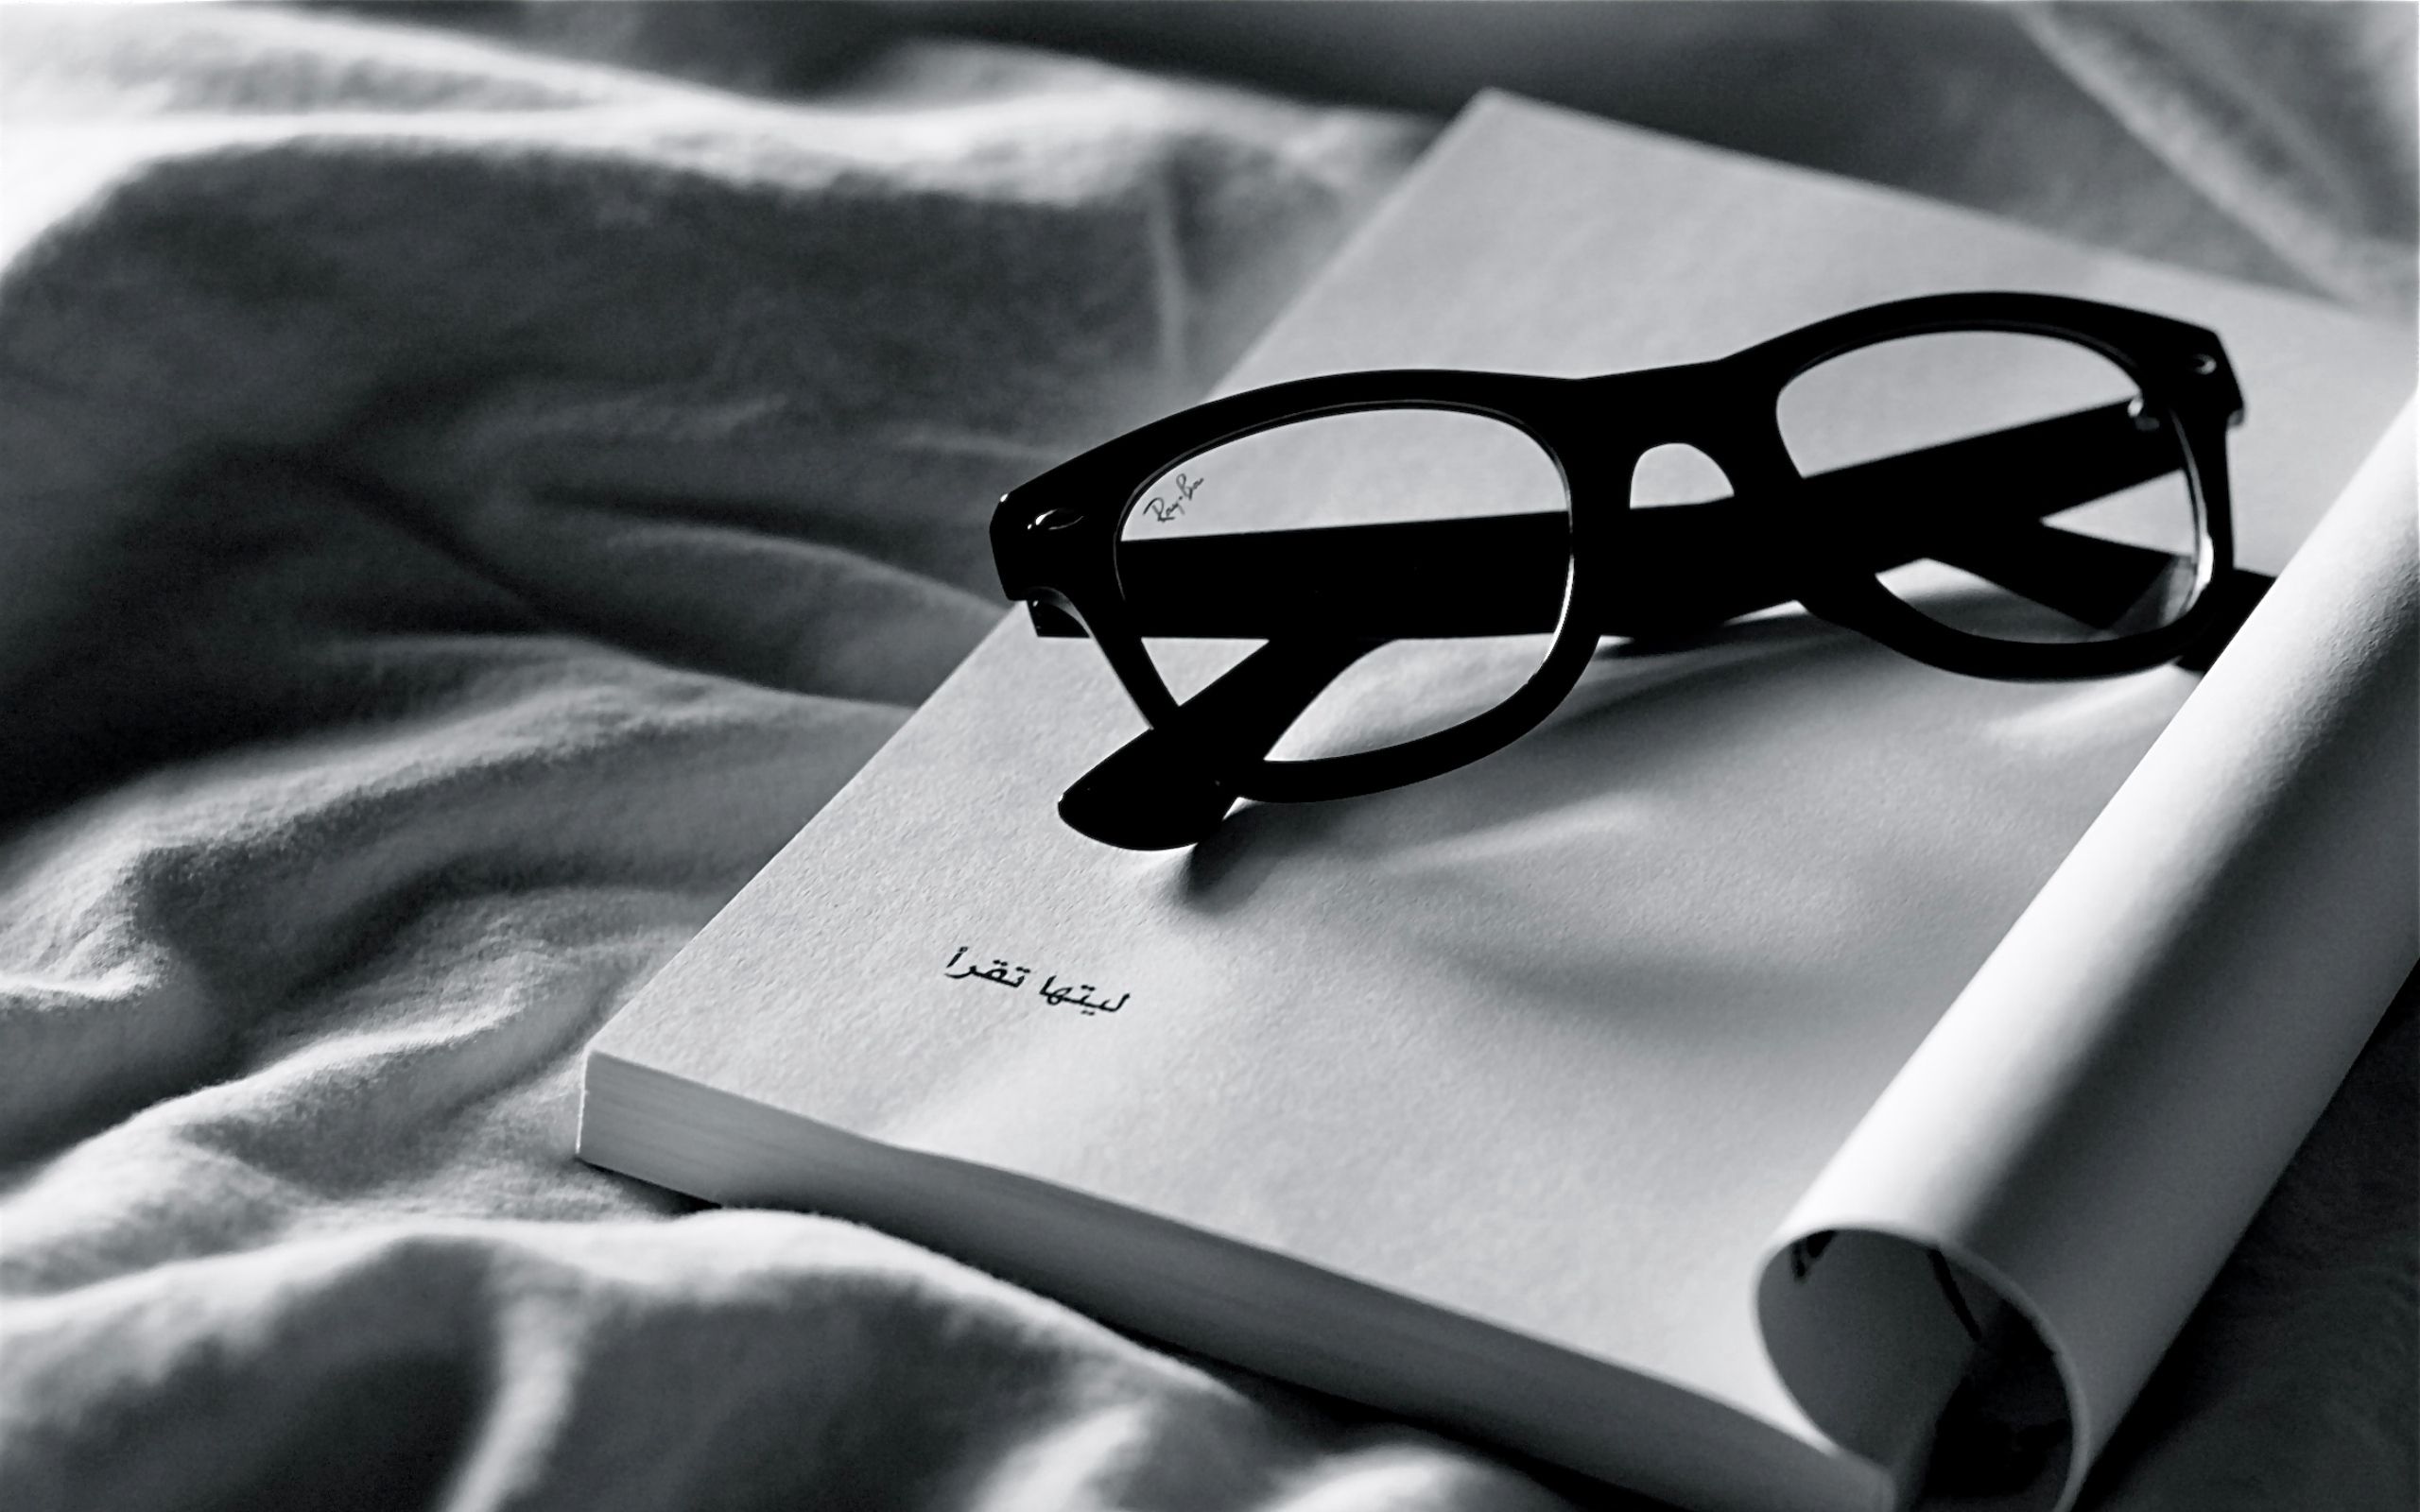 chb, bw, miscellanea, spectacles, miscellaneous, cloth, notebook, glasses